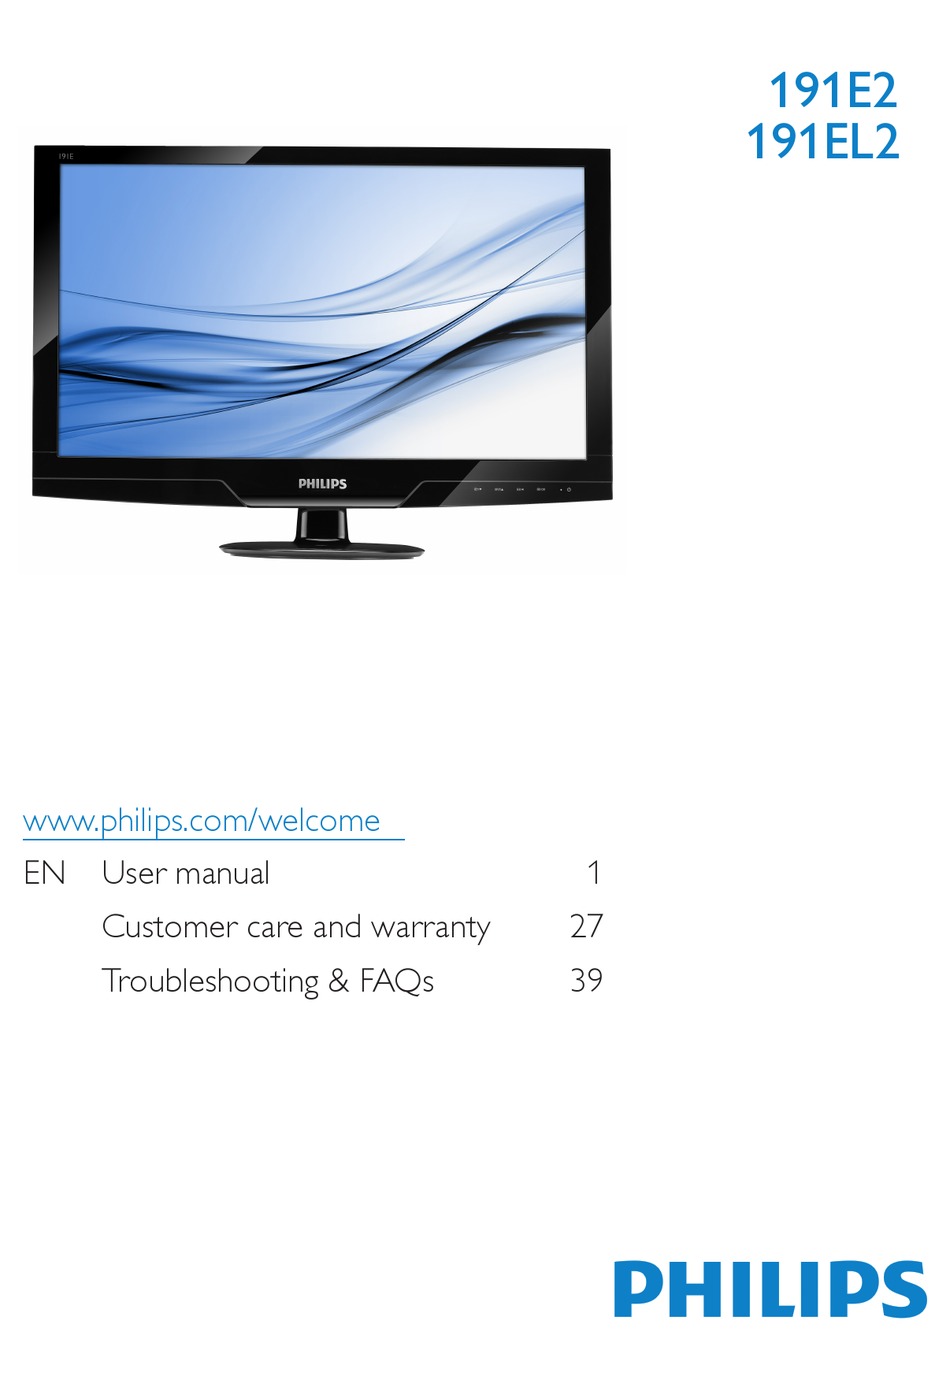 LED monitor with Digital TV tuner 191TE2LB/00